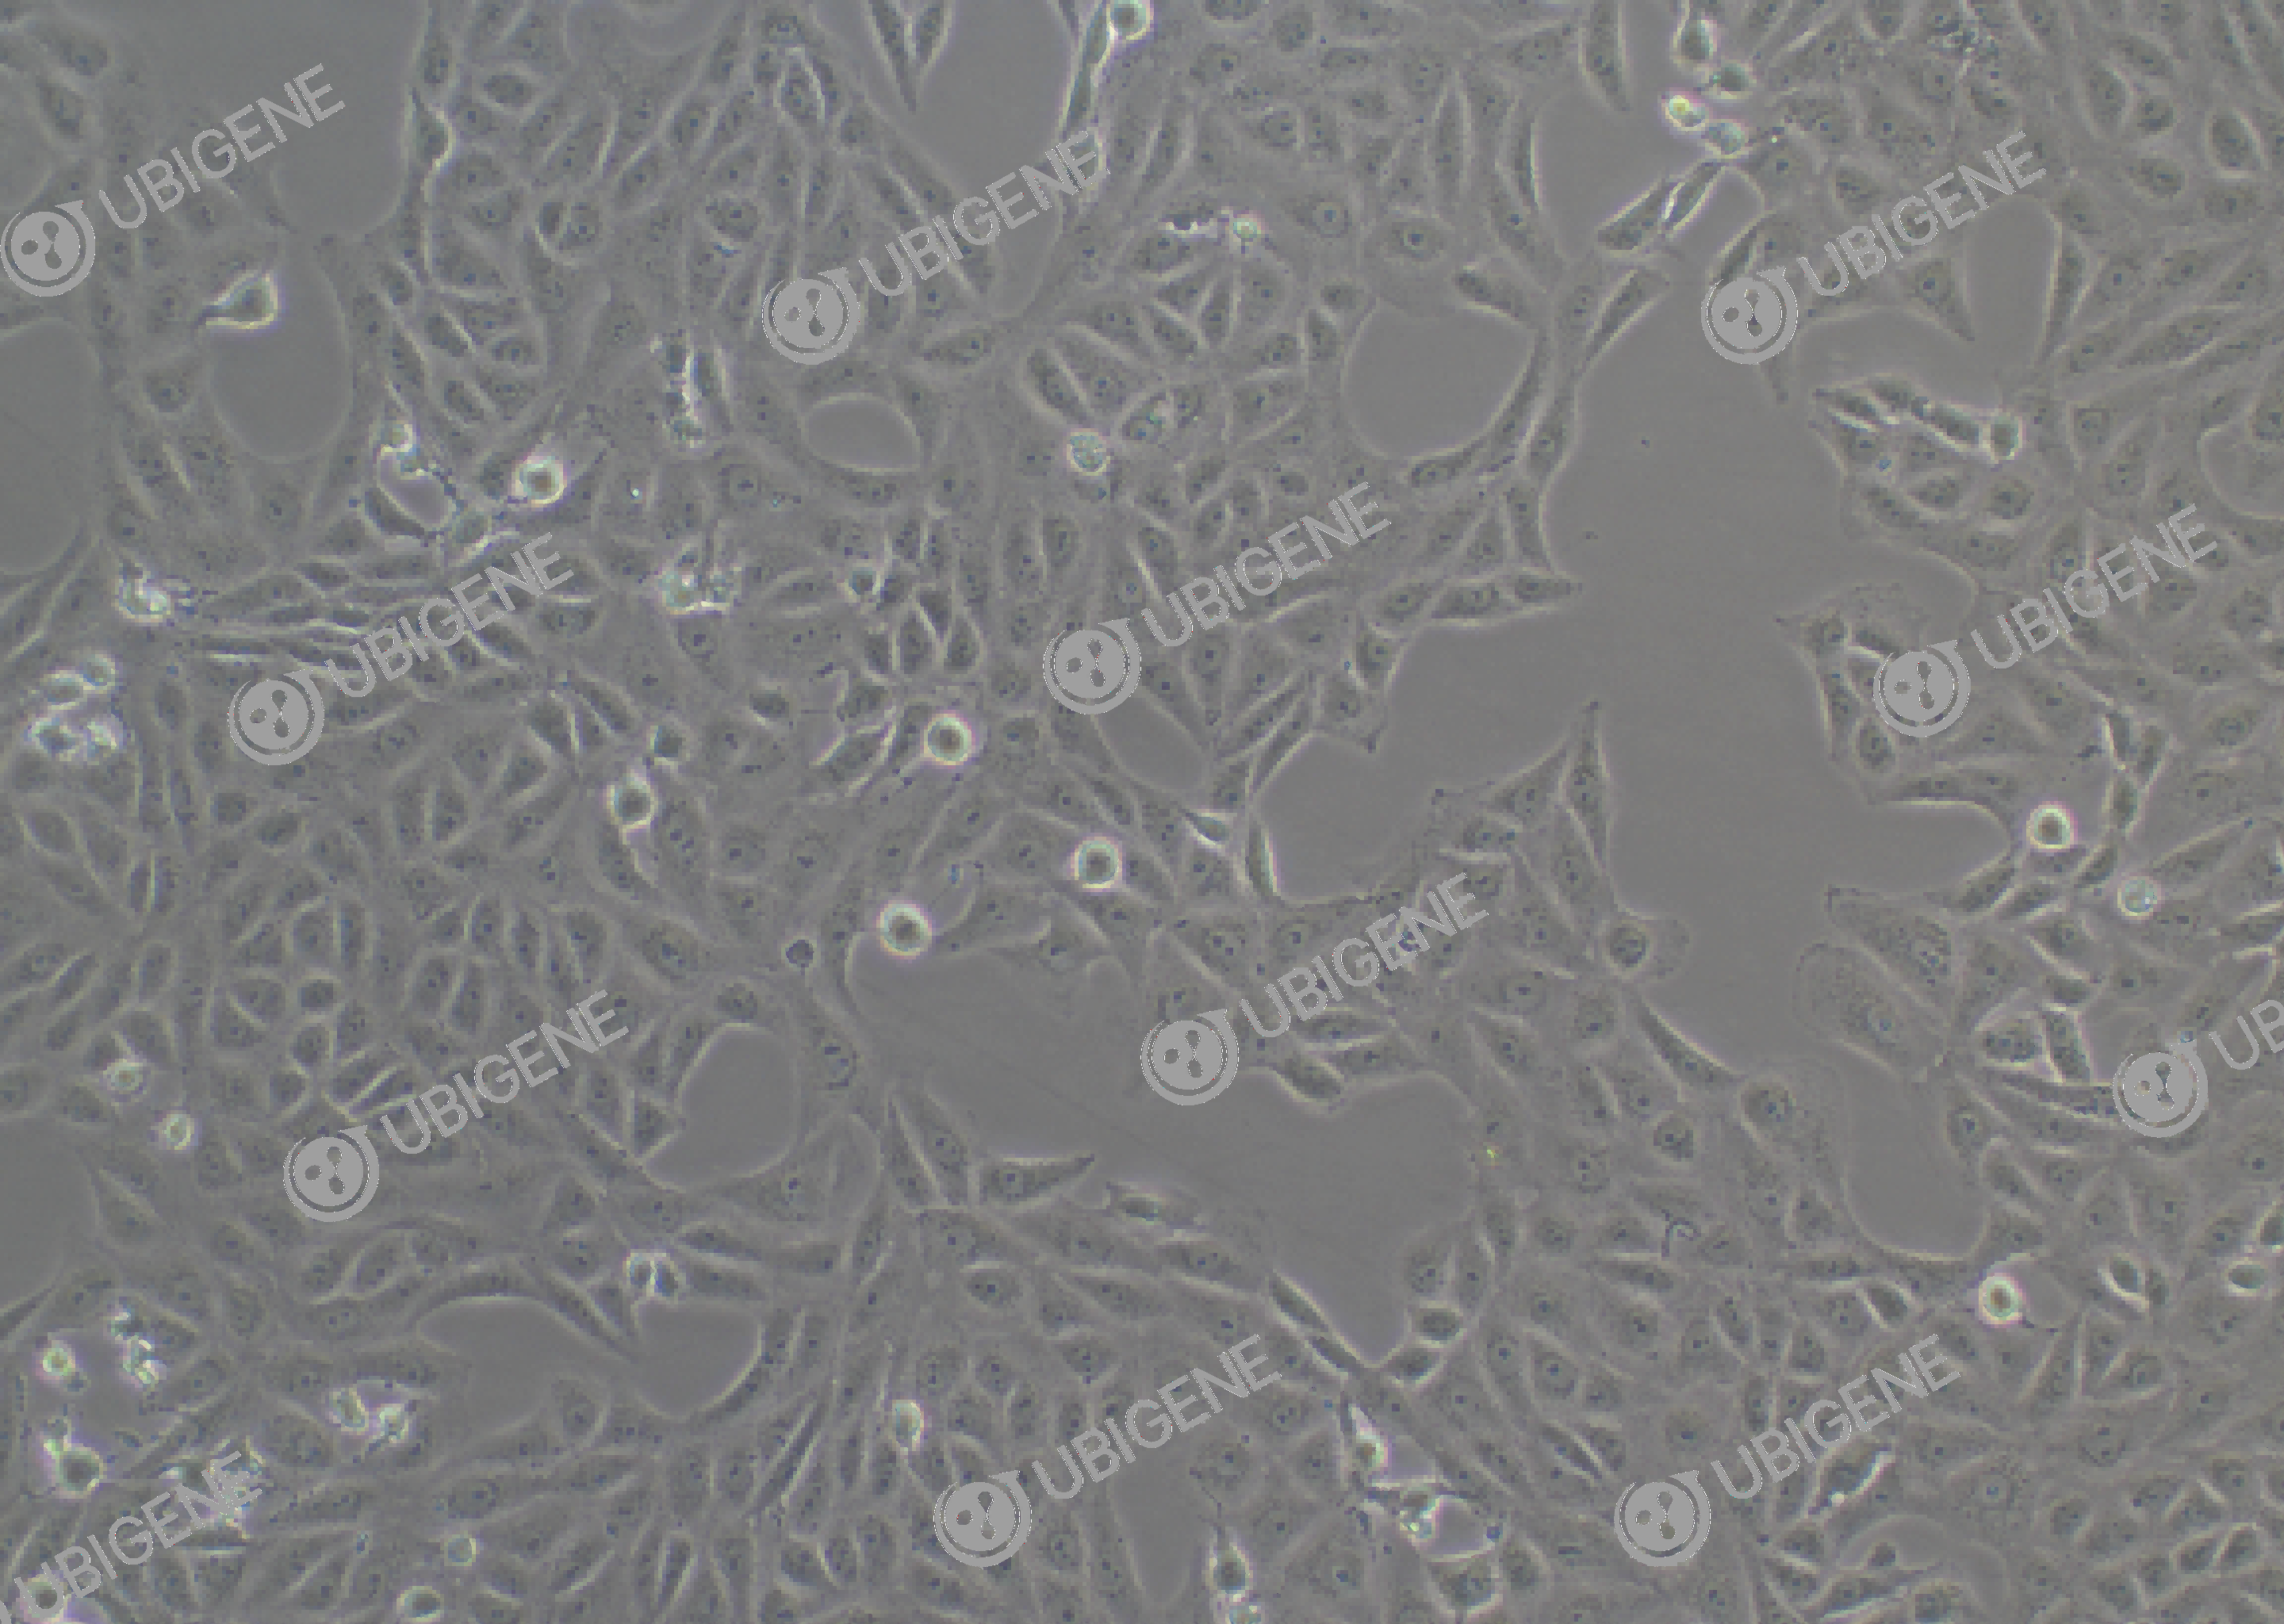 Vero cell line Cultured cell morphology